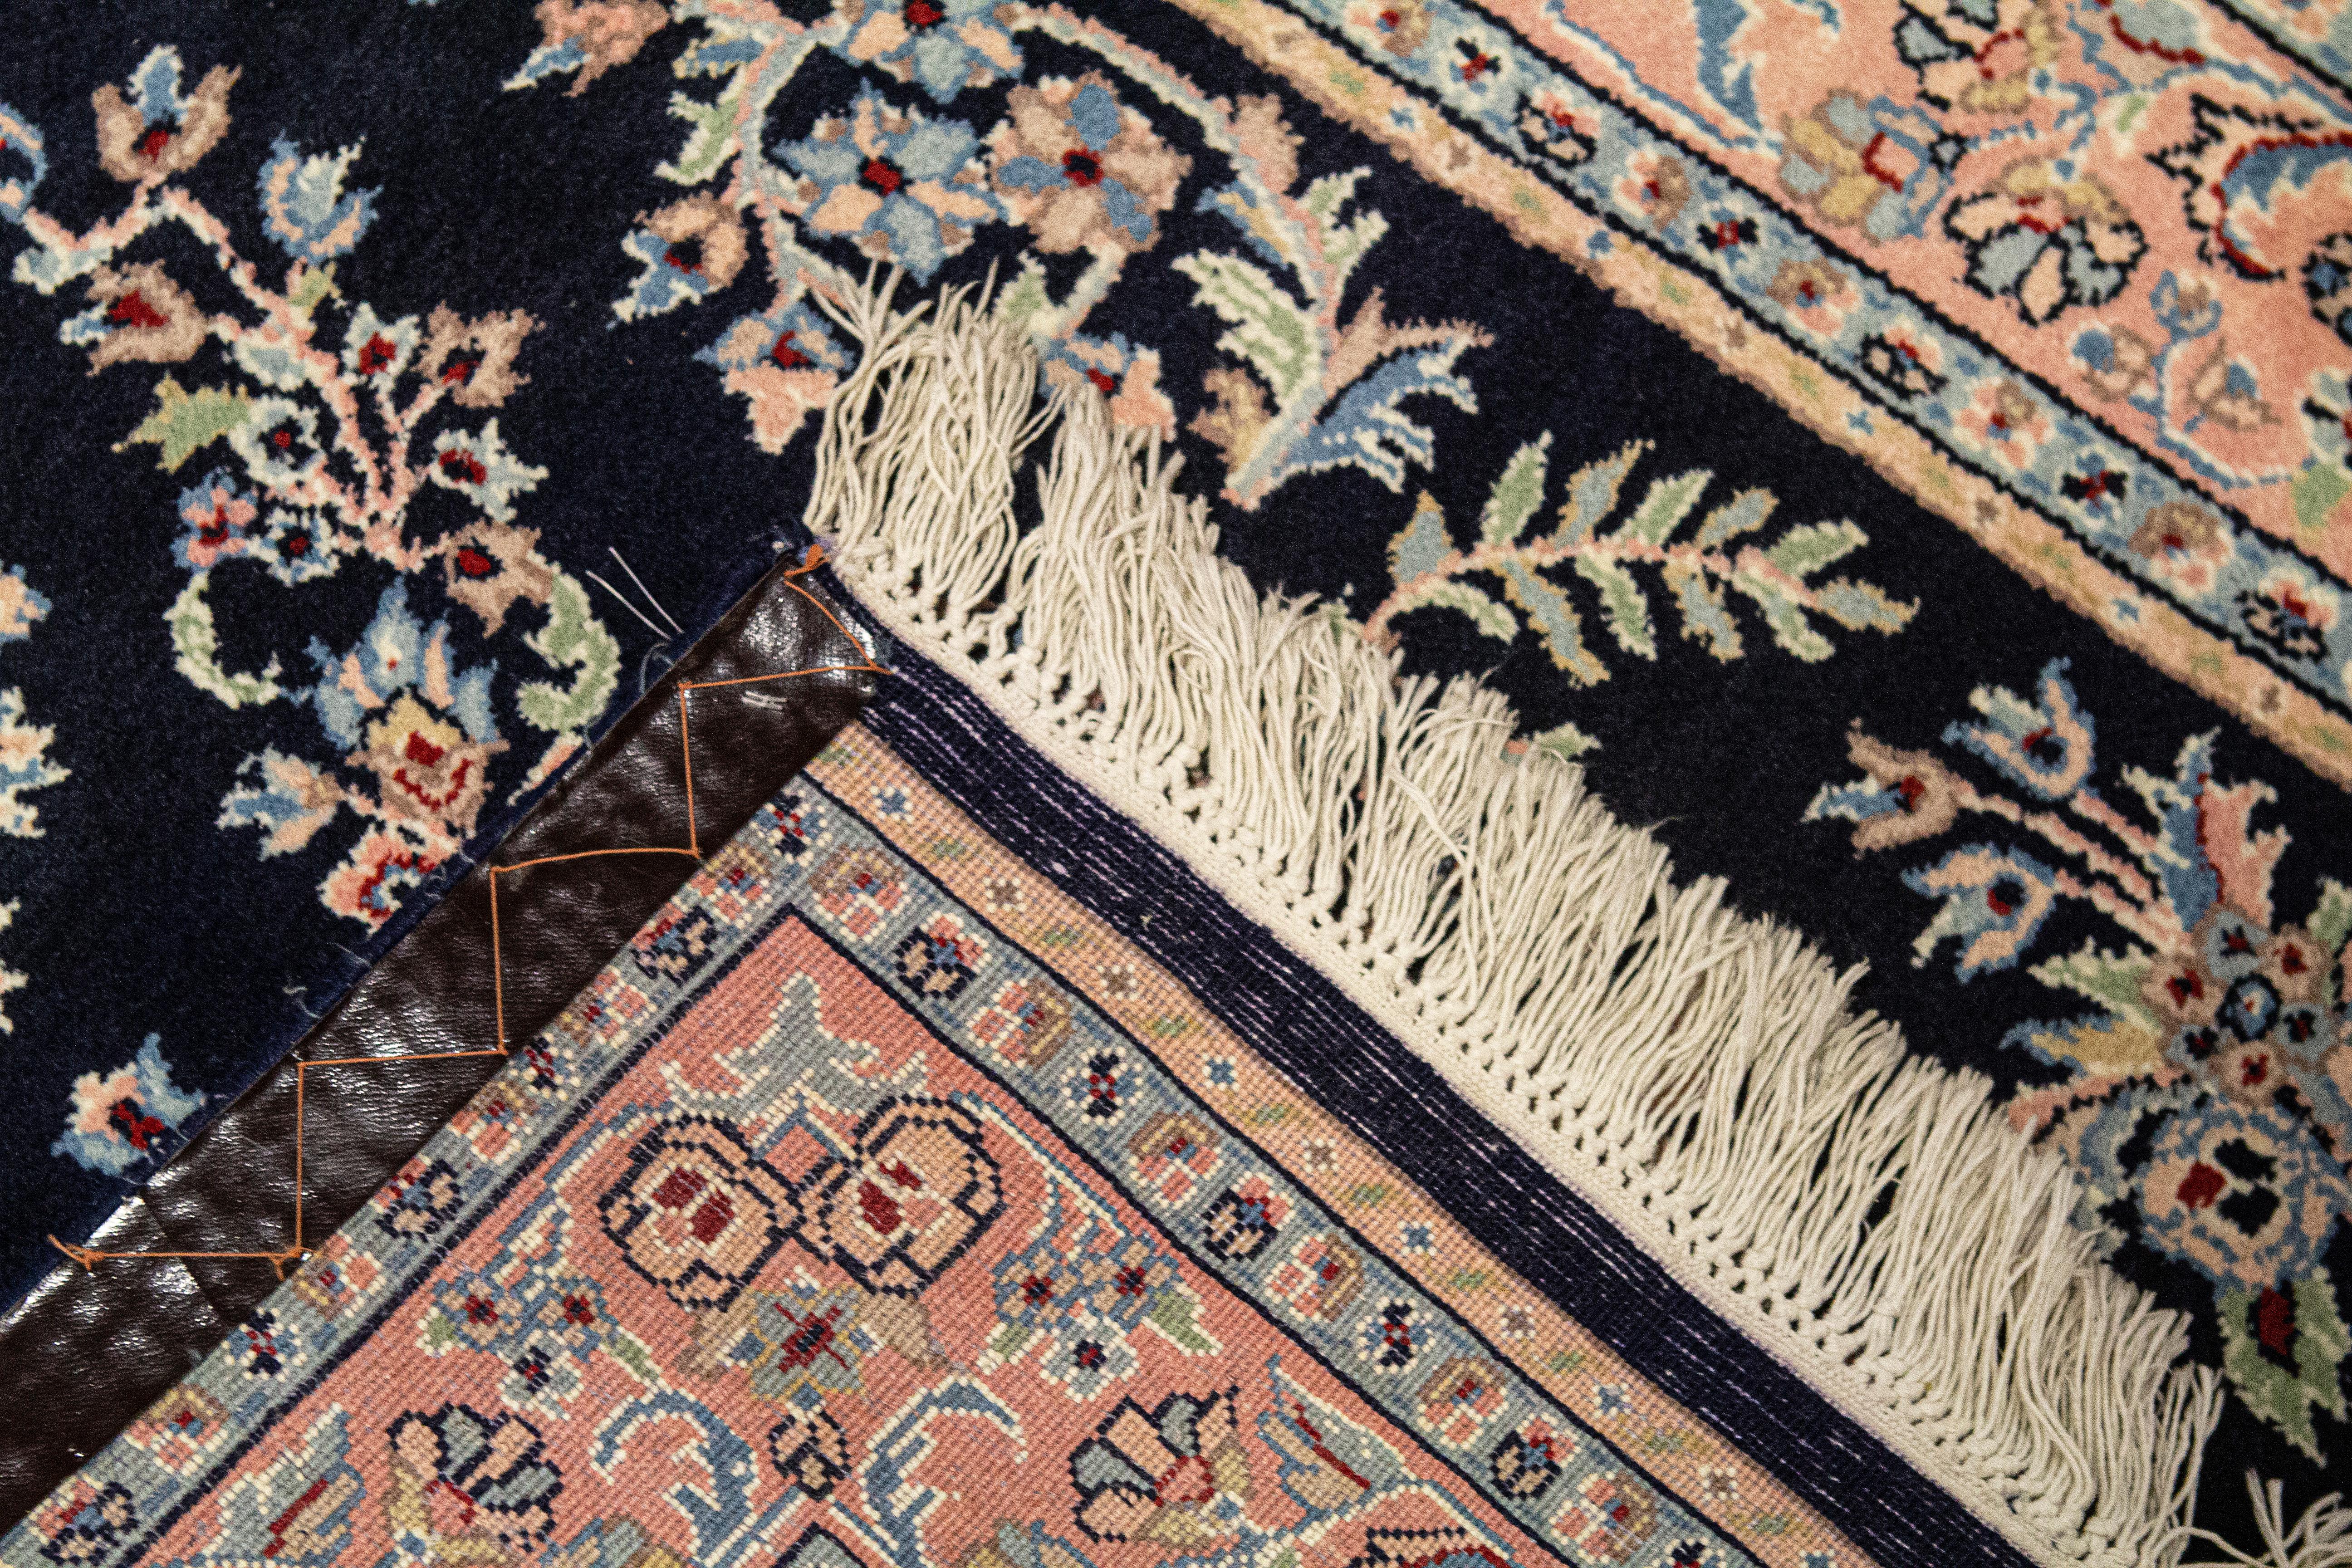 This elegantly handwoven rug is from India and woven from the finest wools to create a soft and luxurious piece that will work well in so many different settings. Size: 3'-10